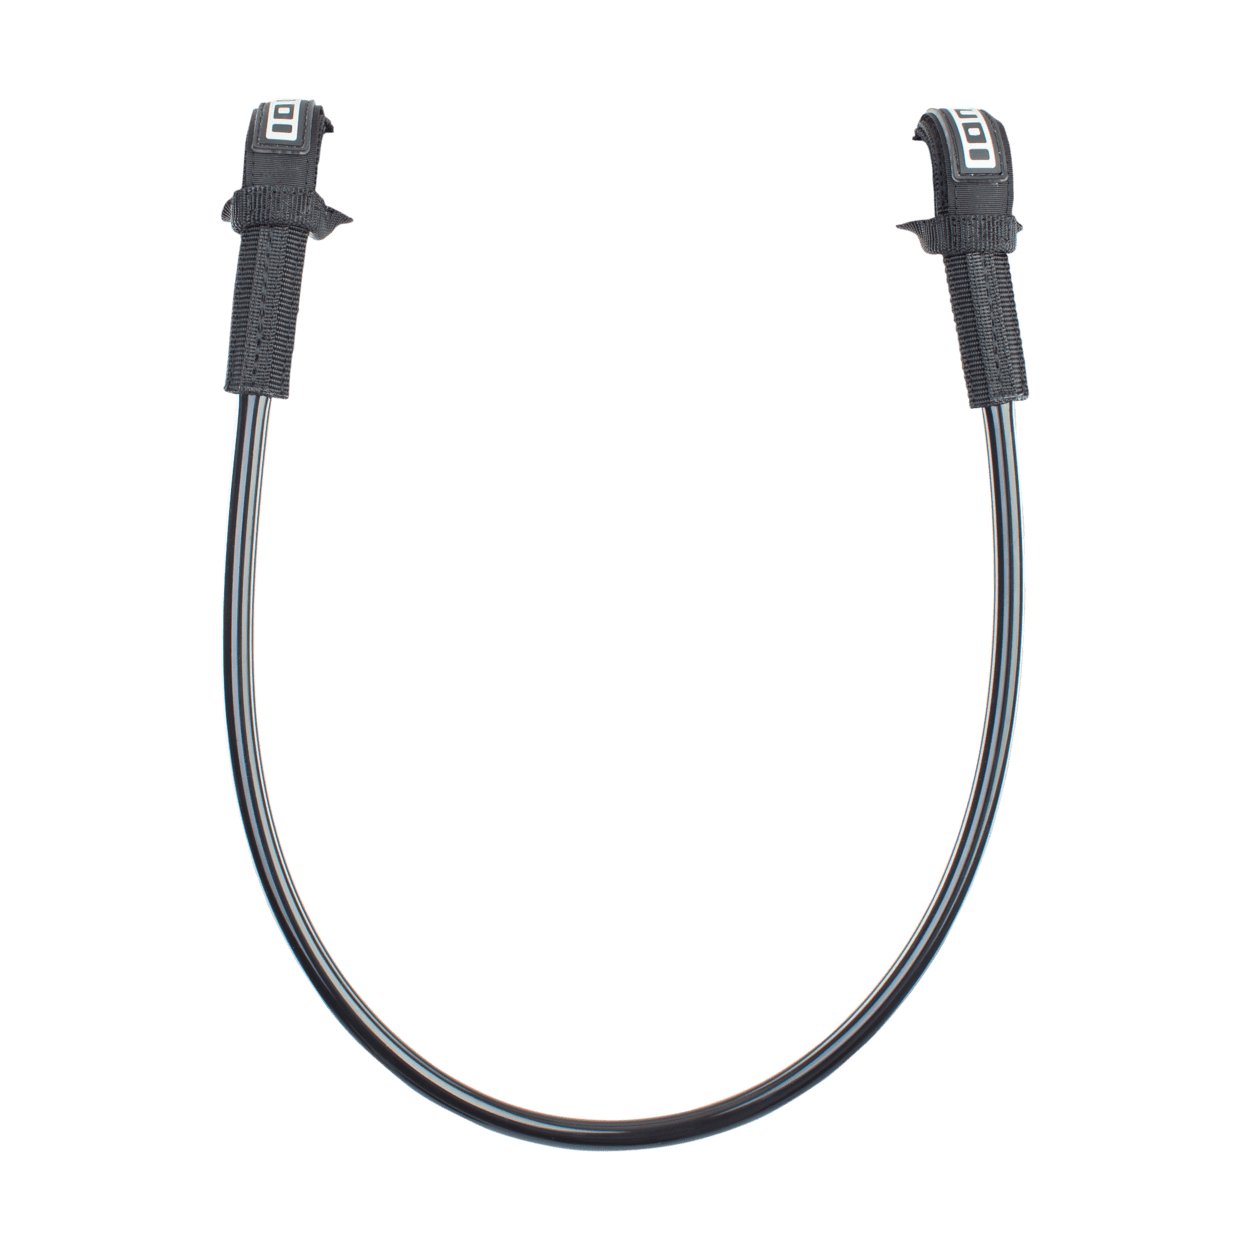 ION Wing Harness Line 2022 - Worthing Watersports - 9010583059792 - Accessories - ION Water